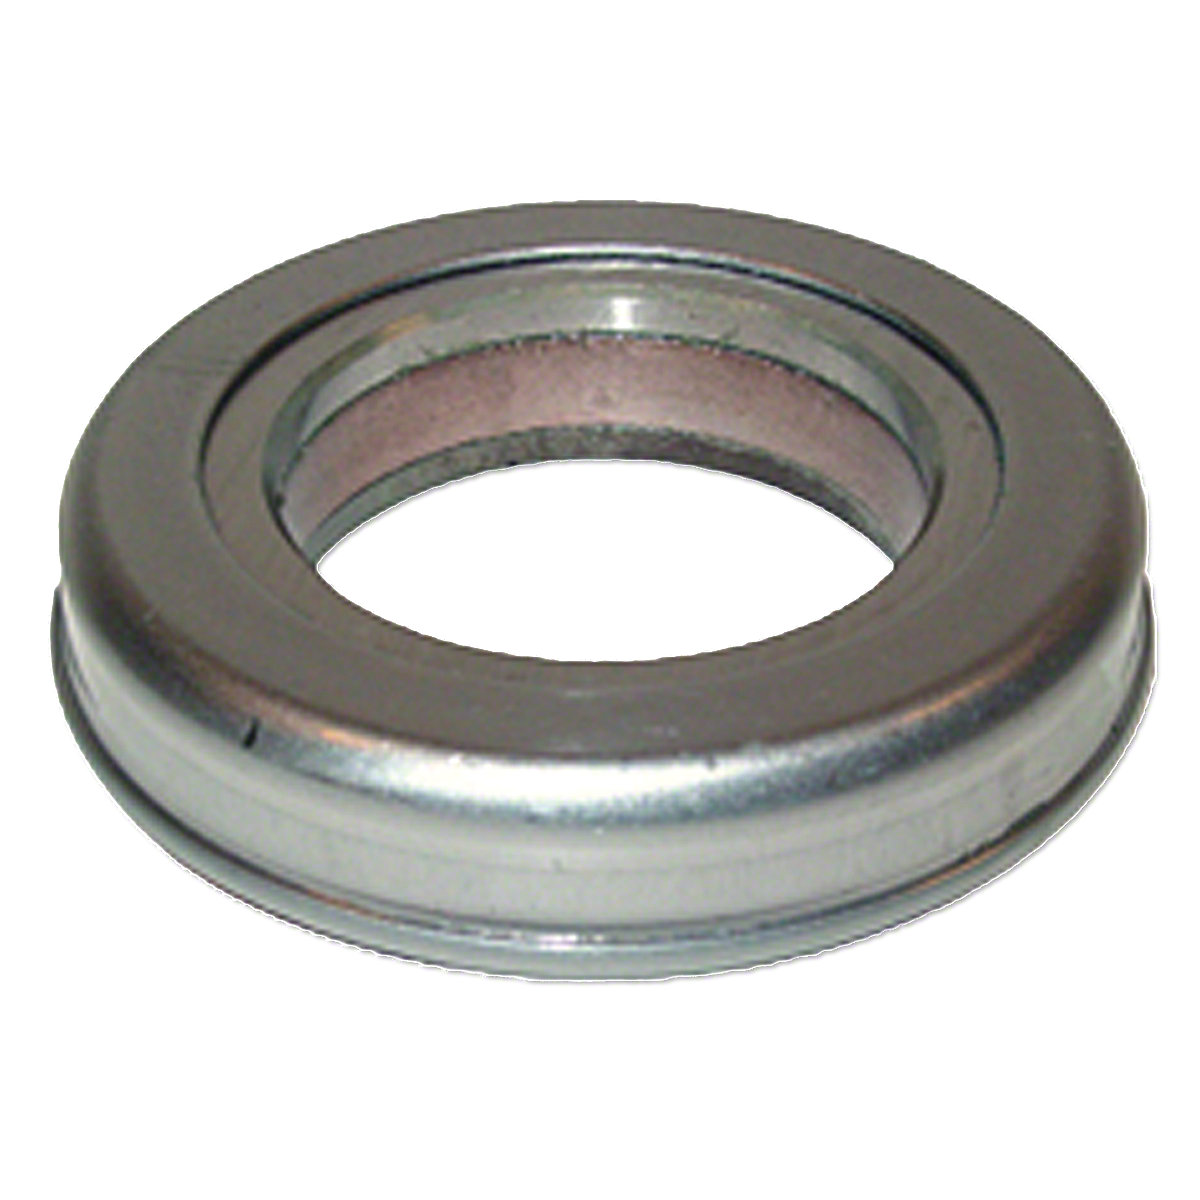 Clutch Throw-Out Bearing